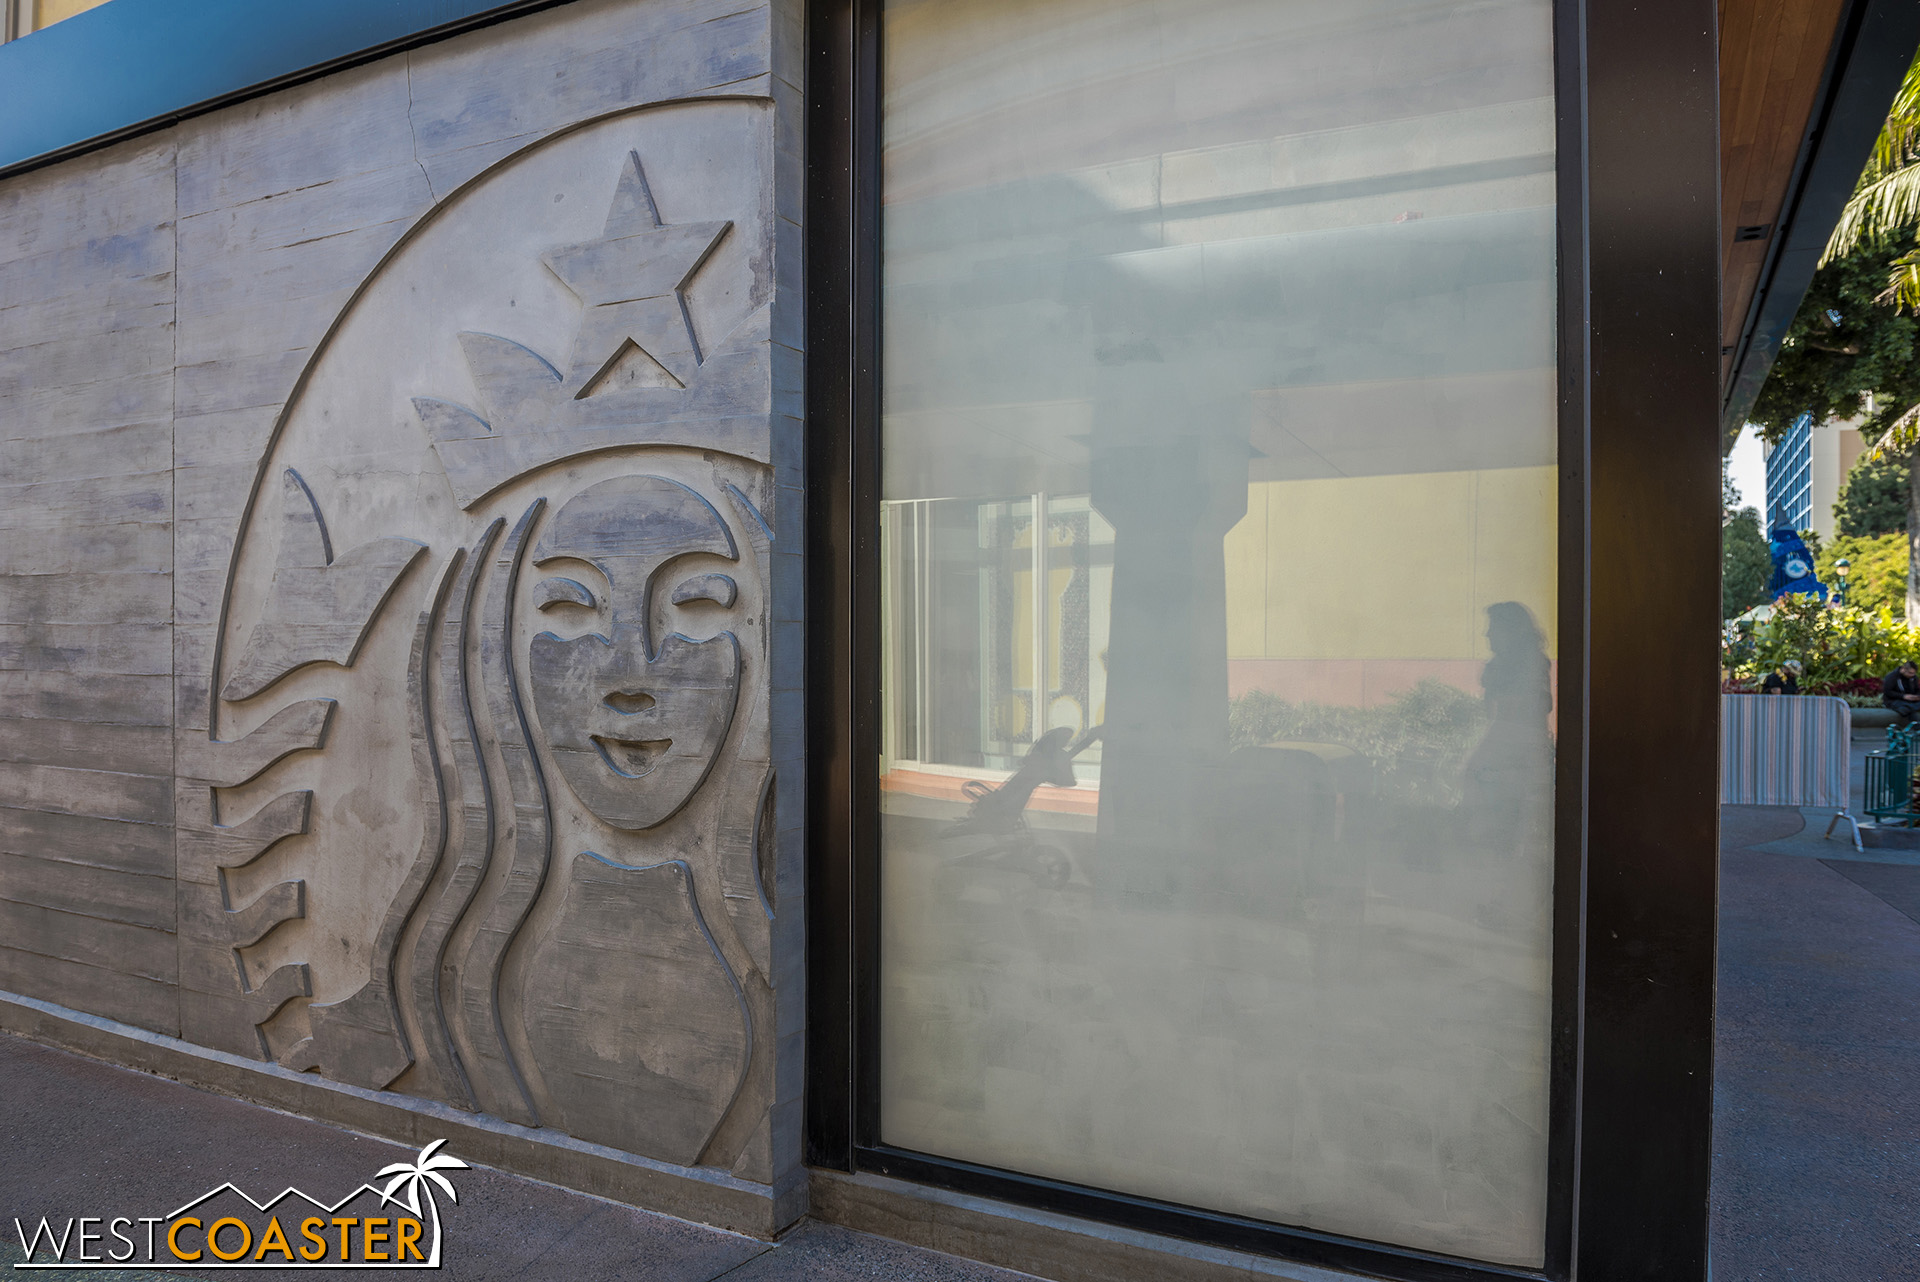  Oh, and it looks like this Starbucks location will be coming back after all! 